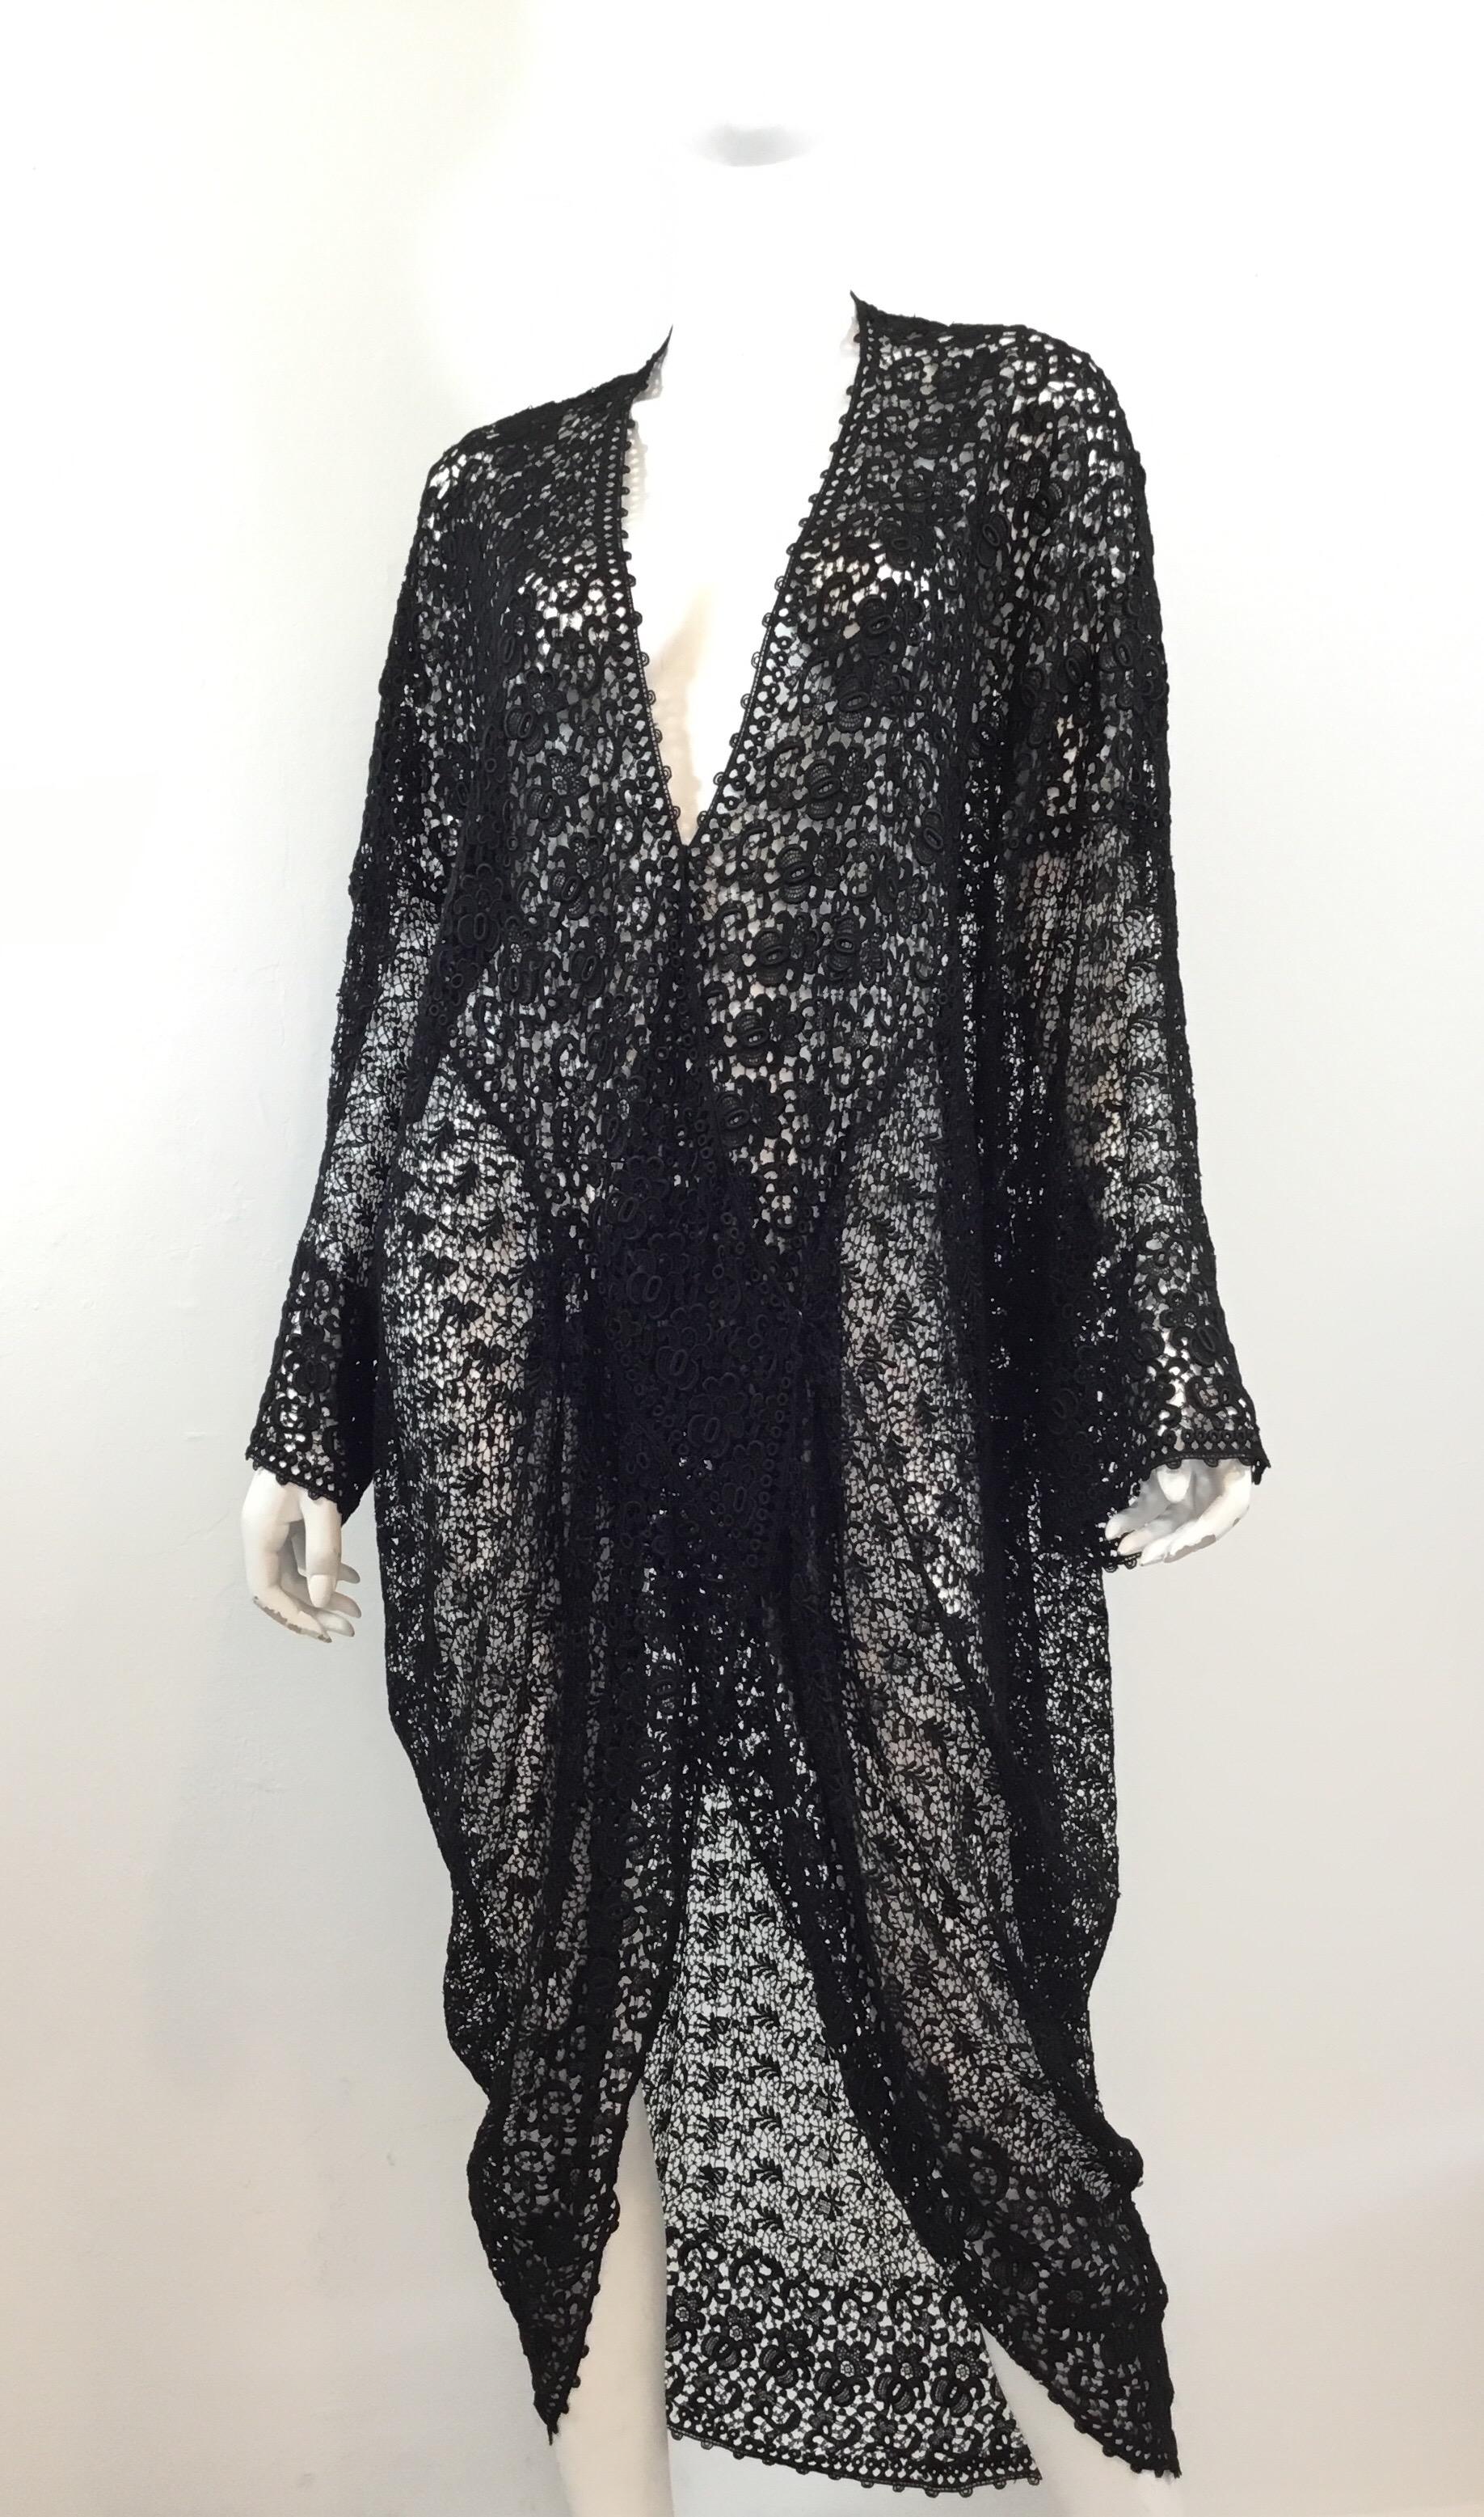 Beautiful Victorian lace cover up with snap closures carefully placed along the draped front. Cover up has some tearing due to the delicate fabric and aging. 

Bust 80” (40 inches across laying flat), length 52”